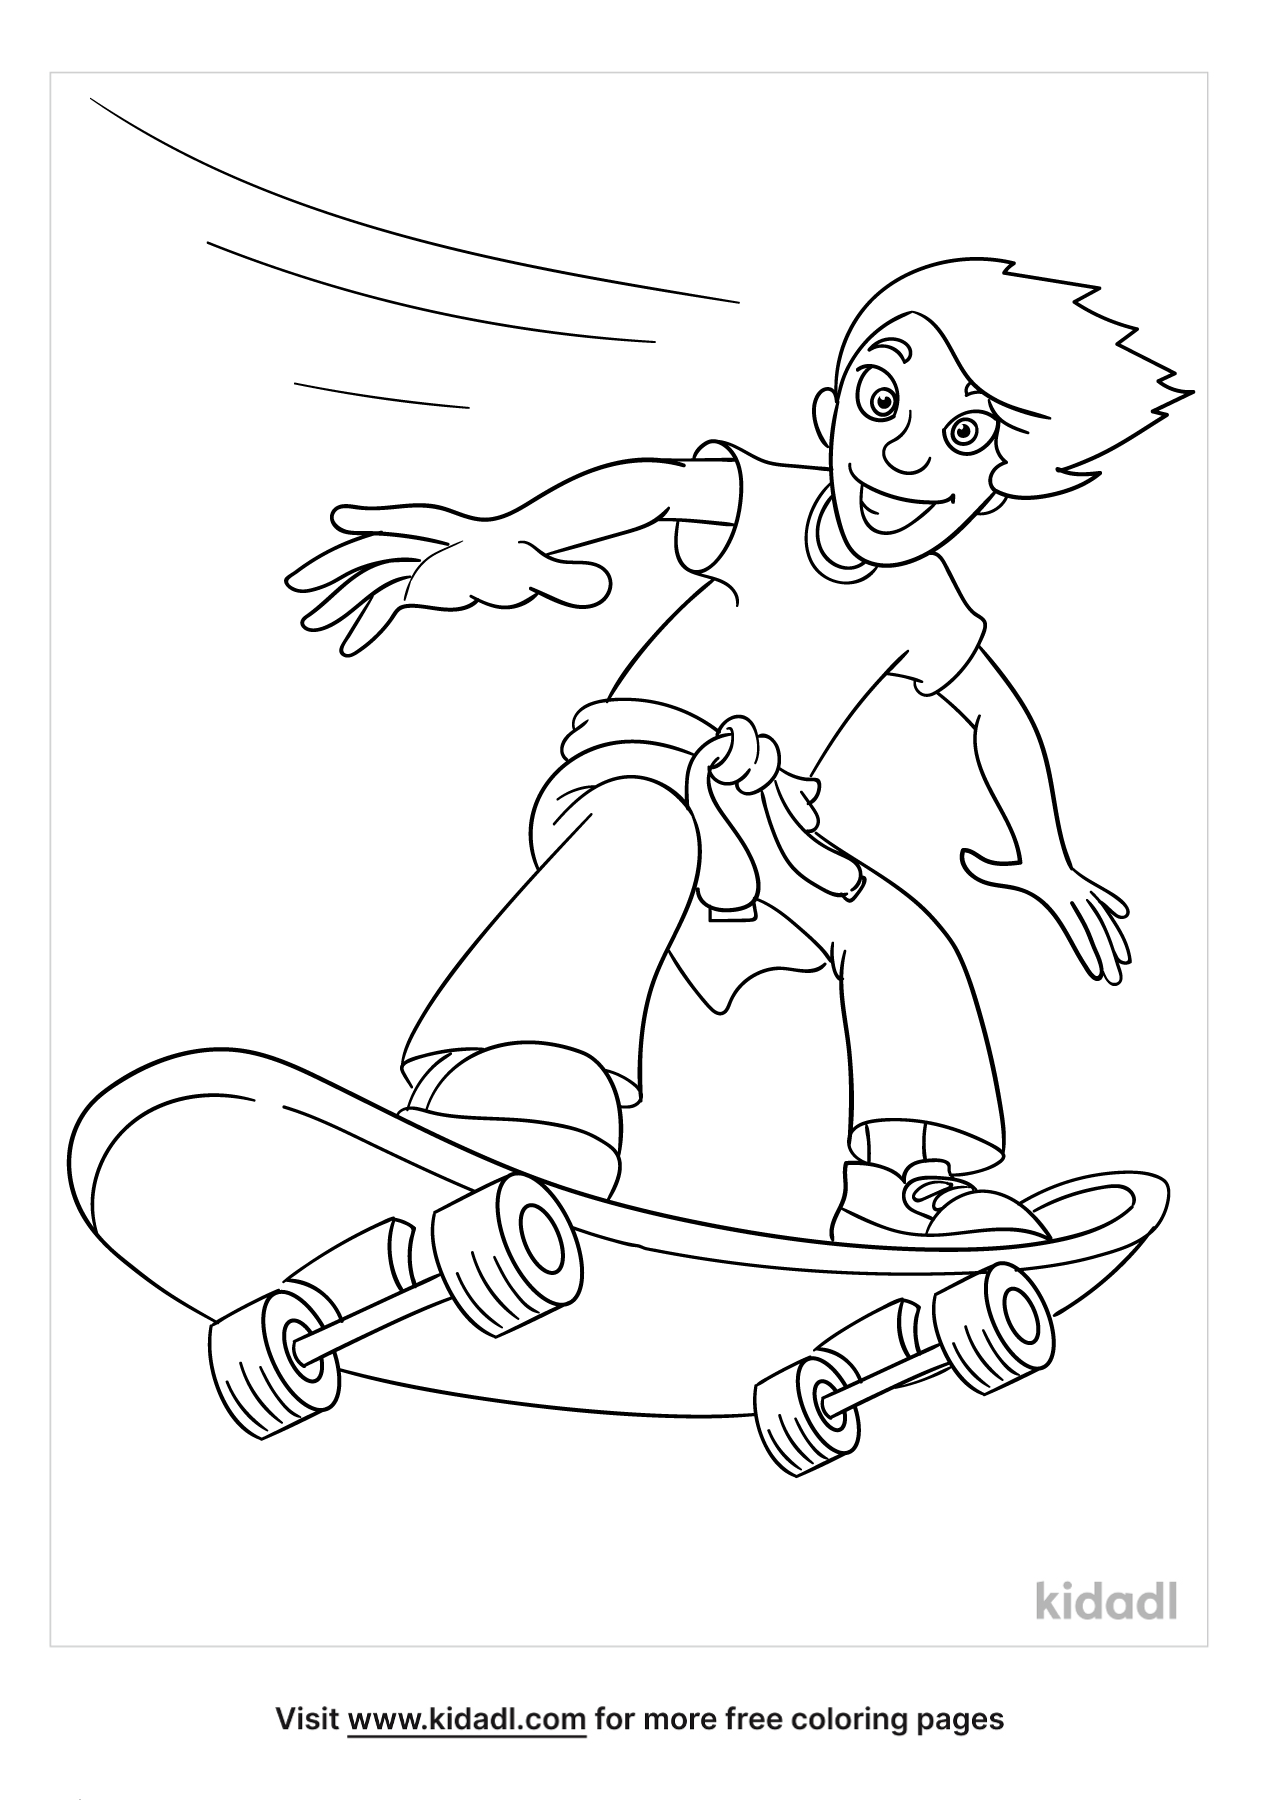 Cool Boy Coloring Pages | Free People Coloring Pages | Kidadl